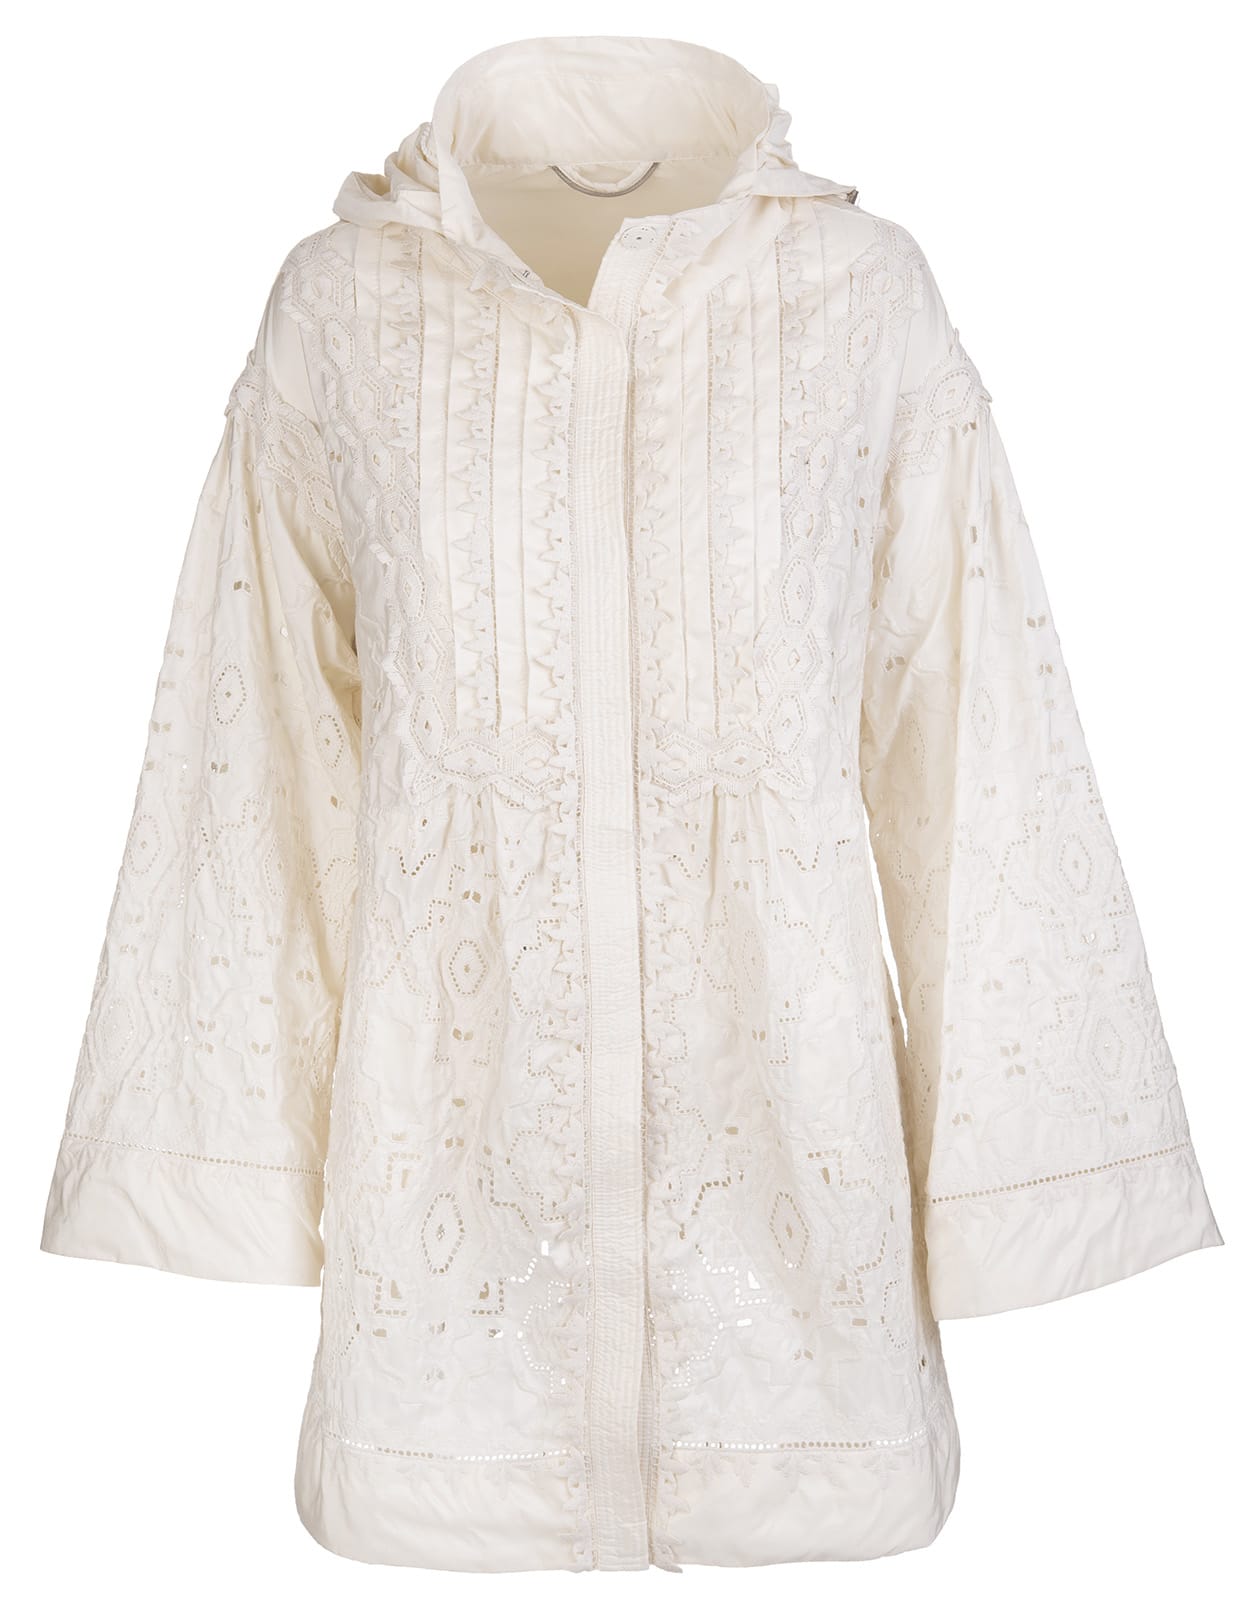 Photo of  Ermanno Scervino Ecru Parka With Embroidery In Tone- shop Ermanno Scervino jackets online sales